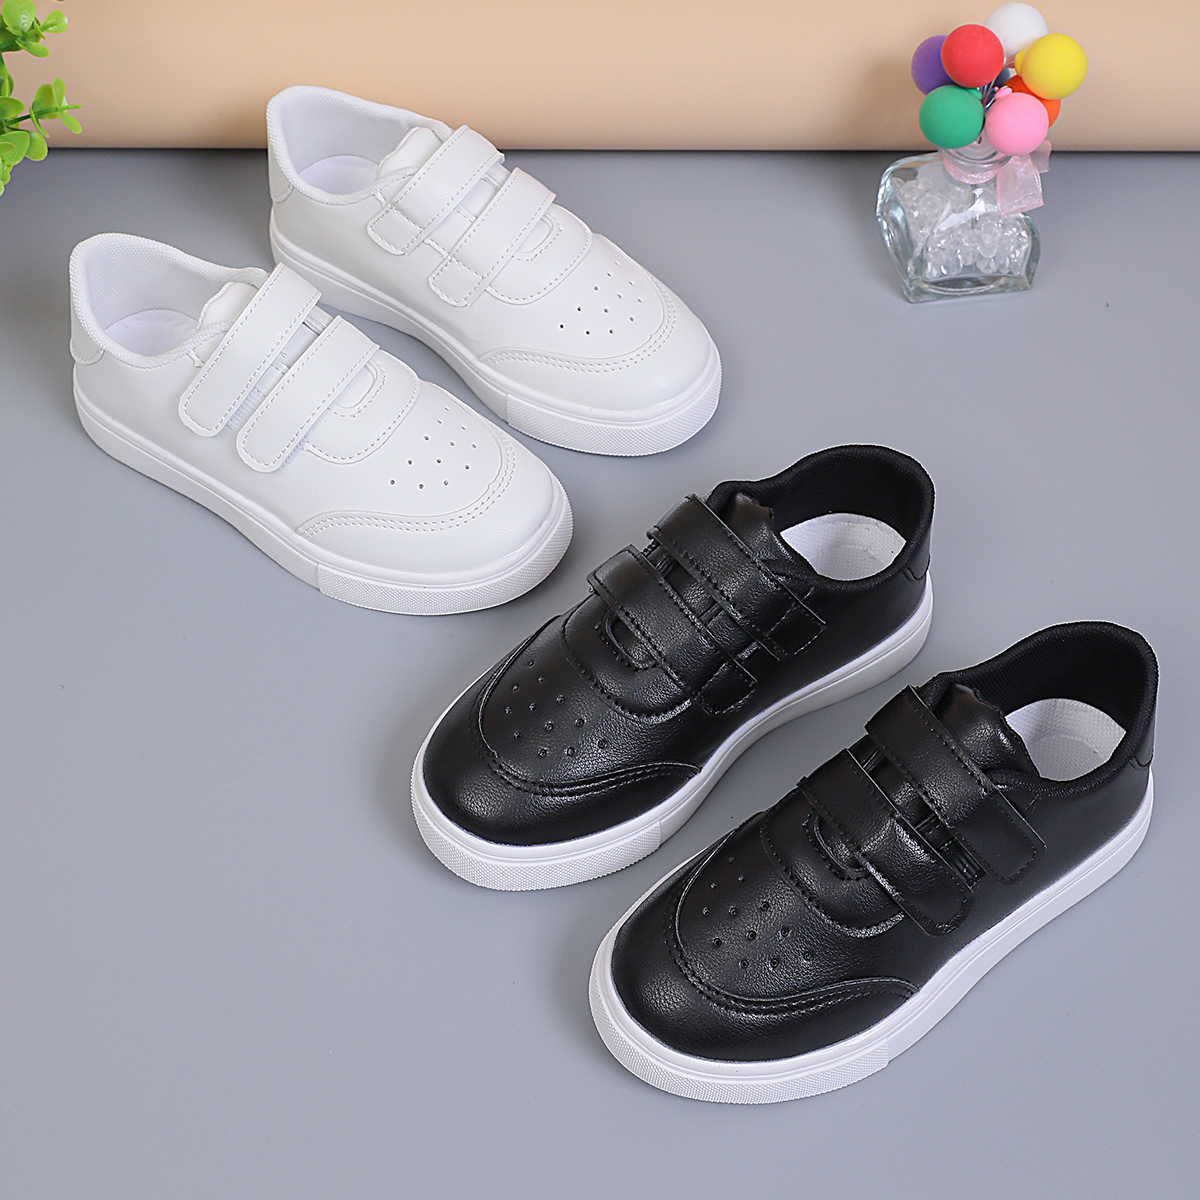 Spring and Autumn Single Shoes Baby Shoes White Soft soled Walking Shoes0-3Boys and young children's shoes, children's leather shoes, small white shoes, board shoes